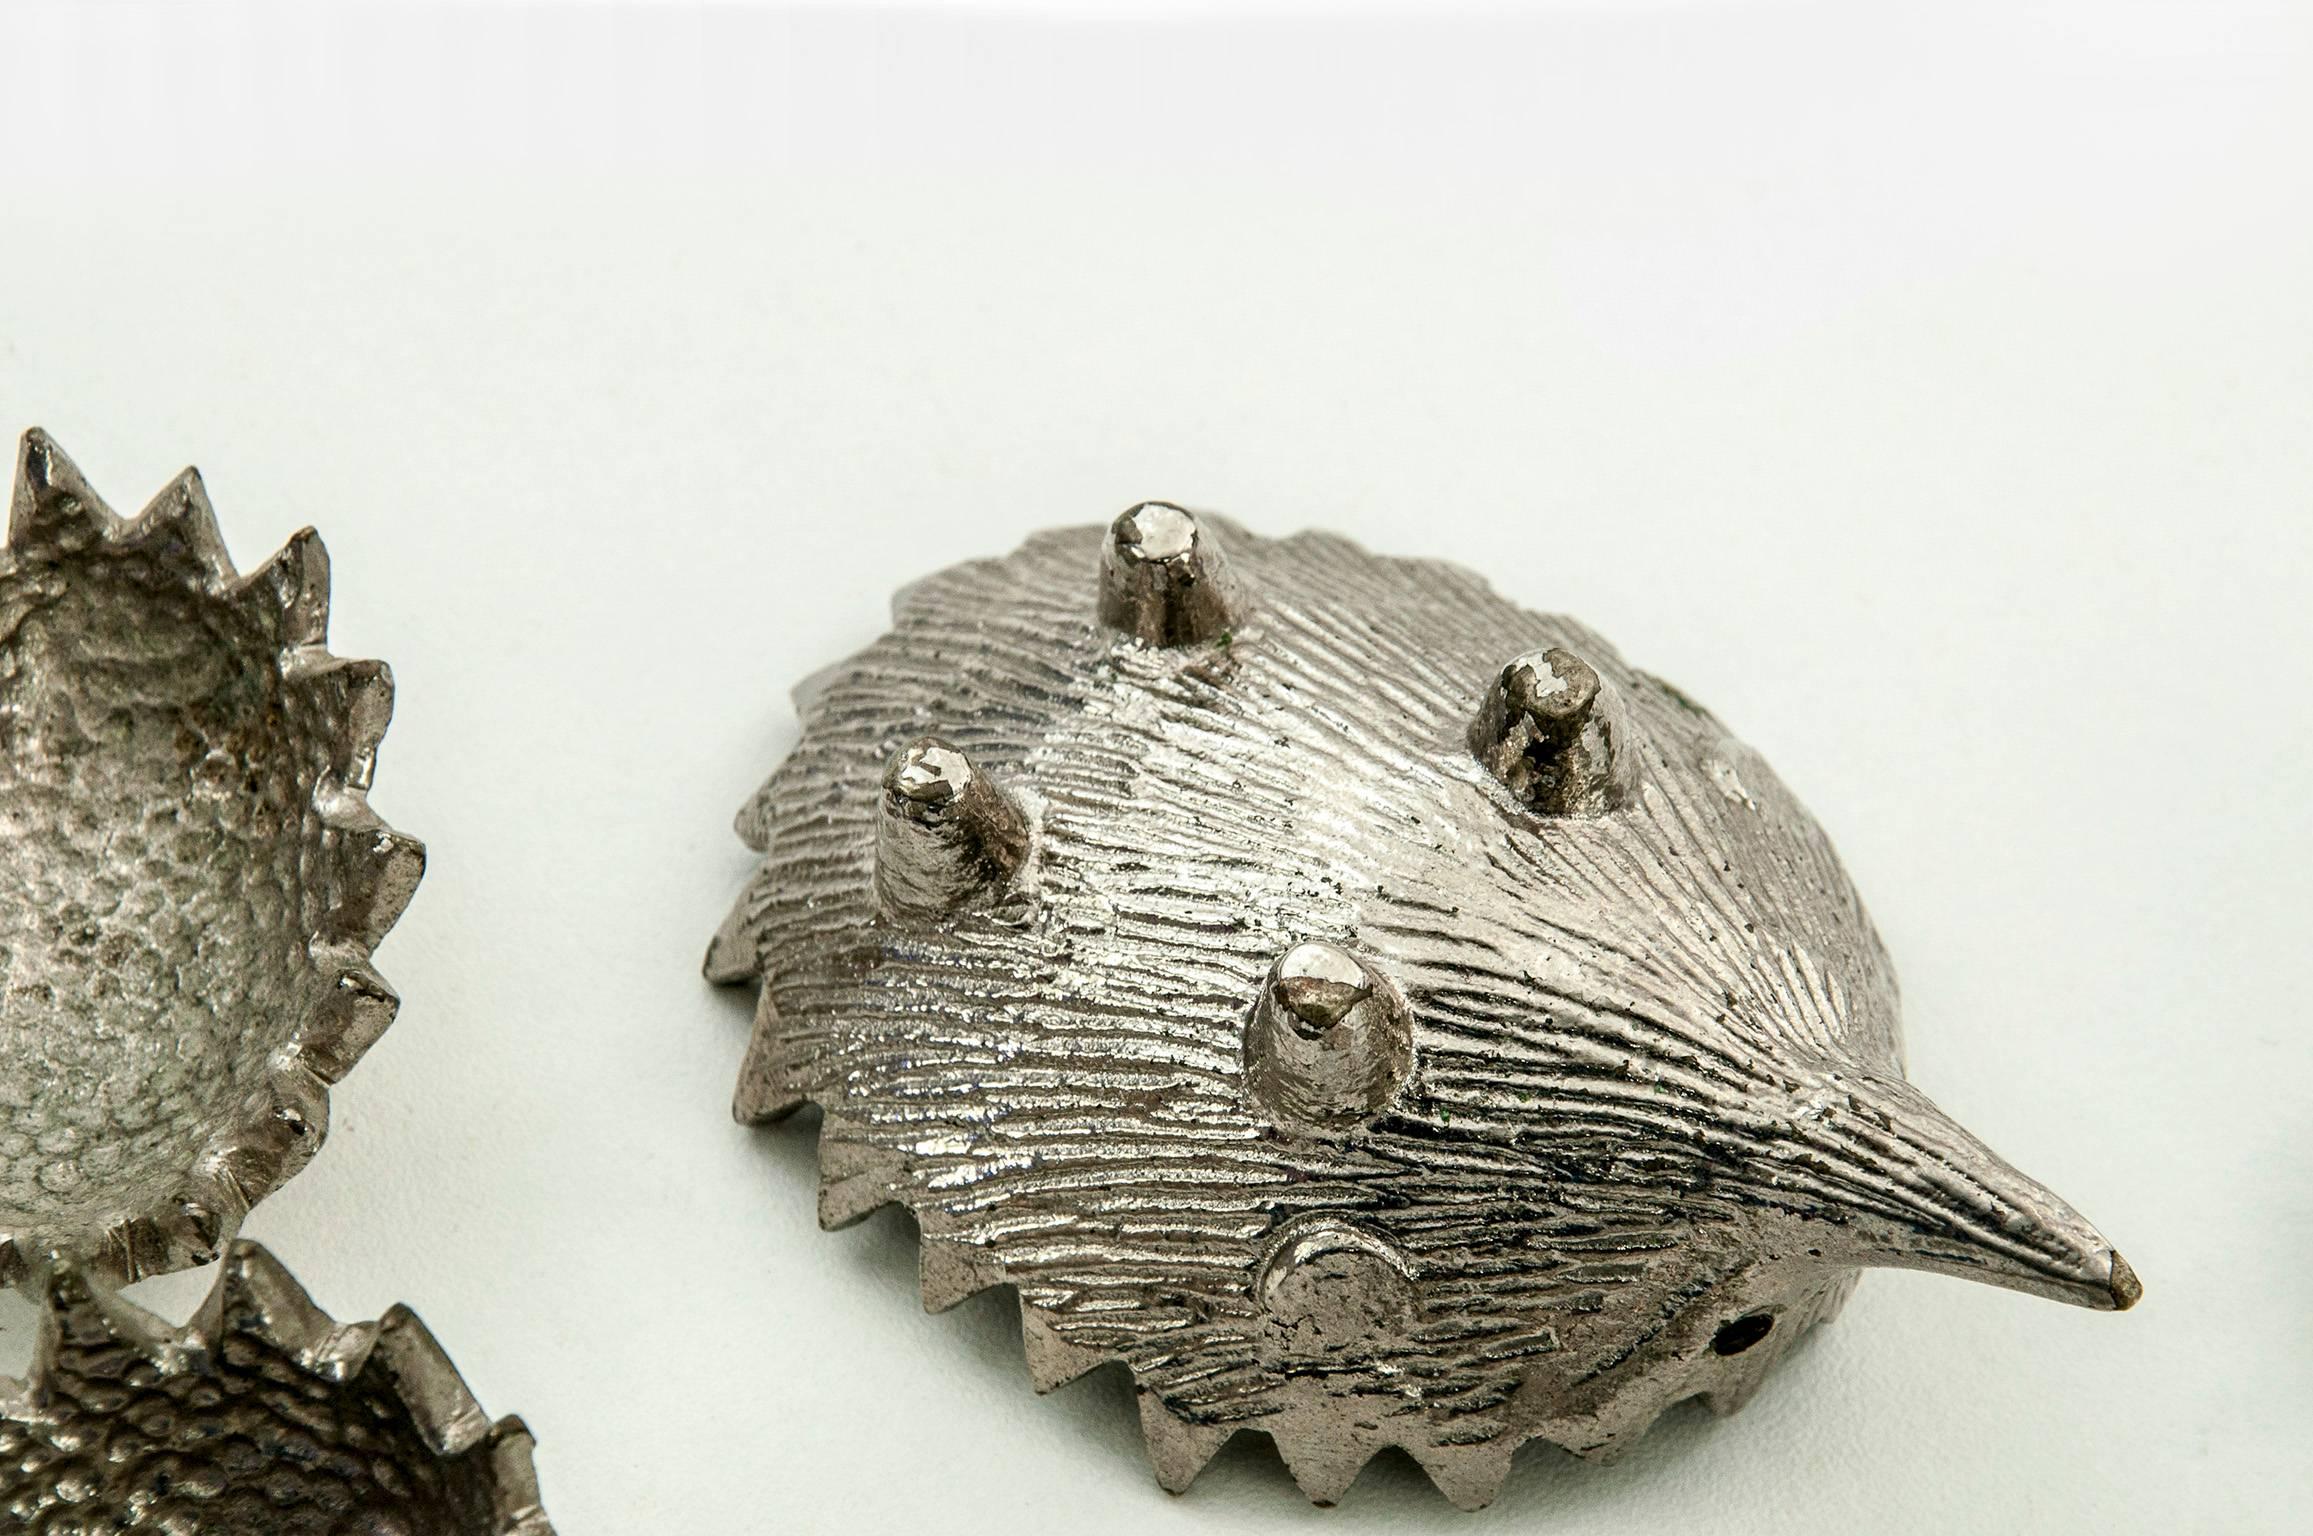 Silvered Hedgehog Stackable Ashtray by Walter Bosse for Hertha Baller